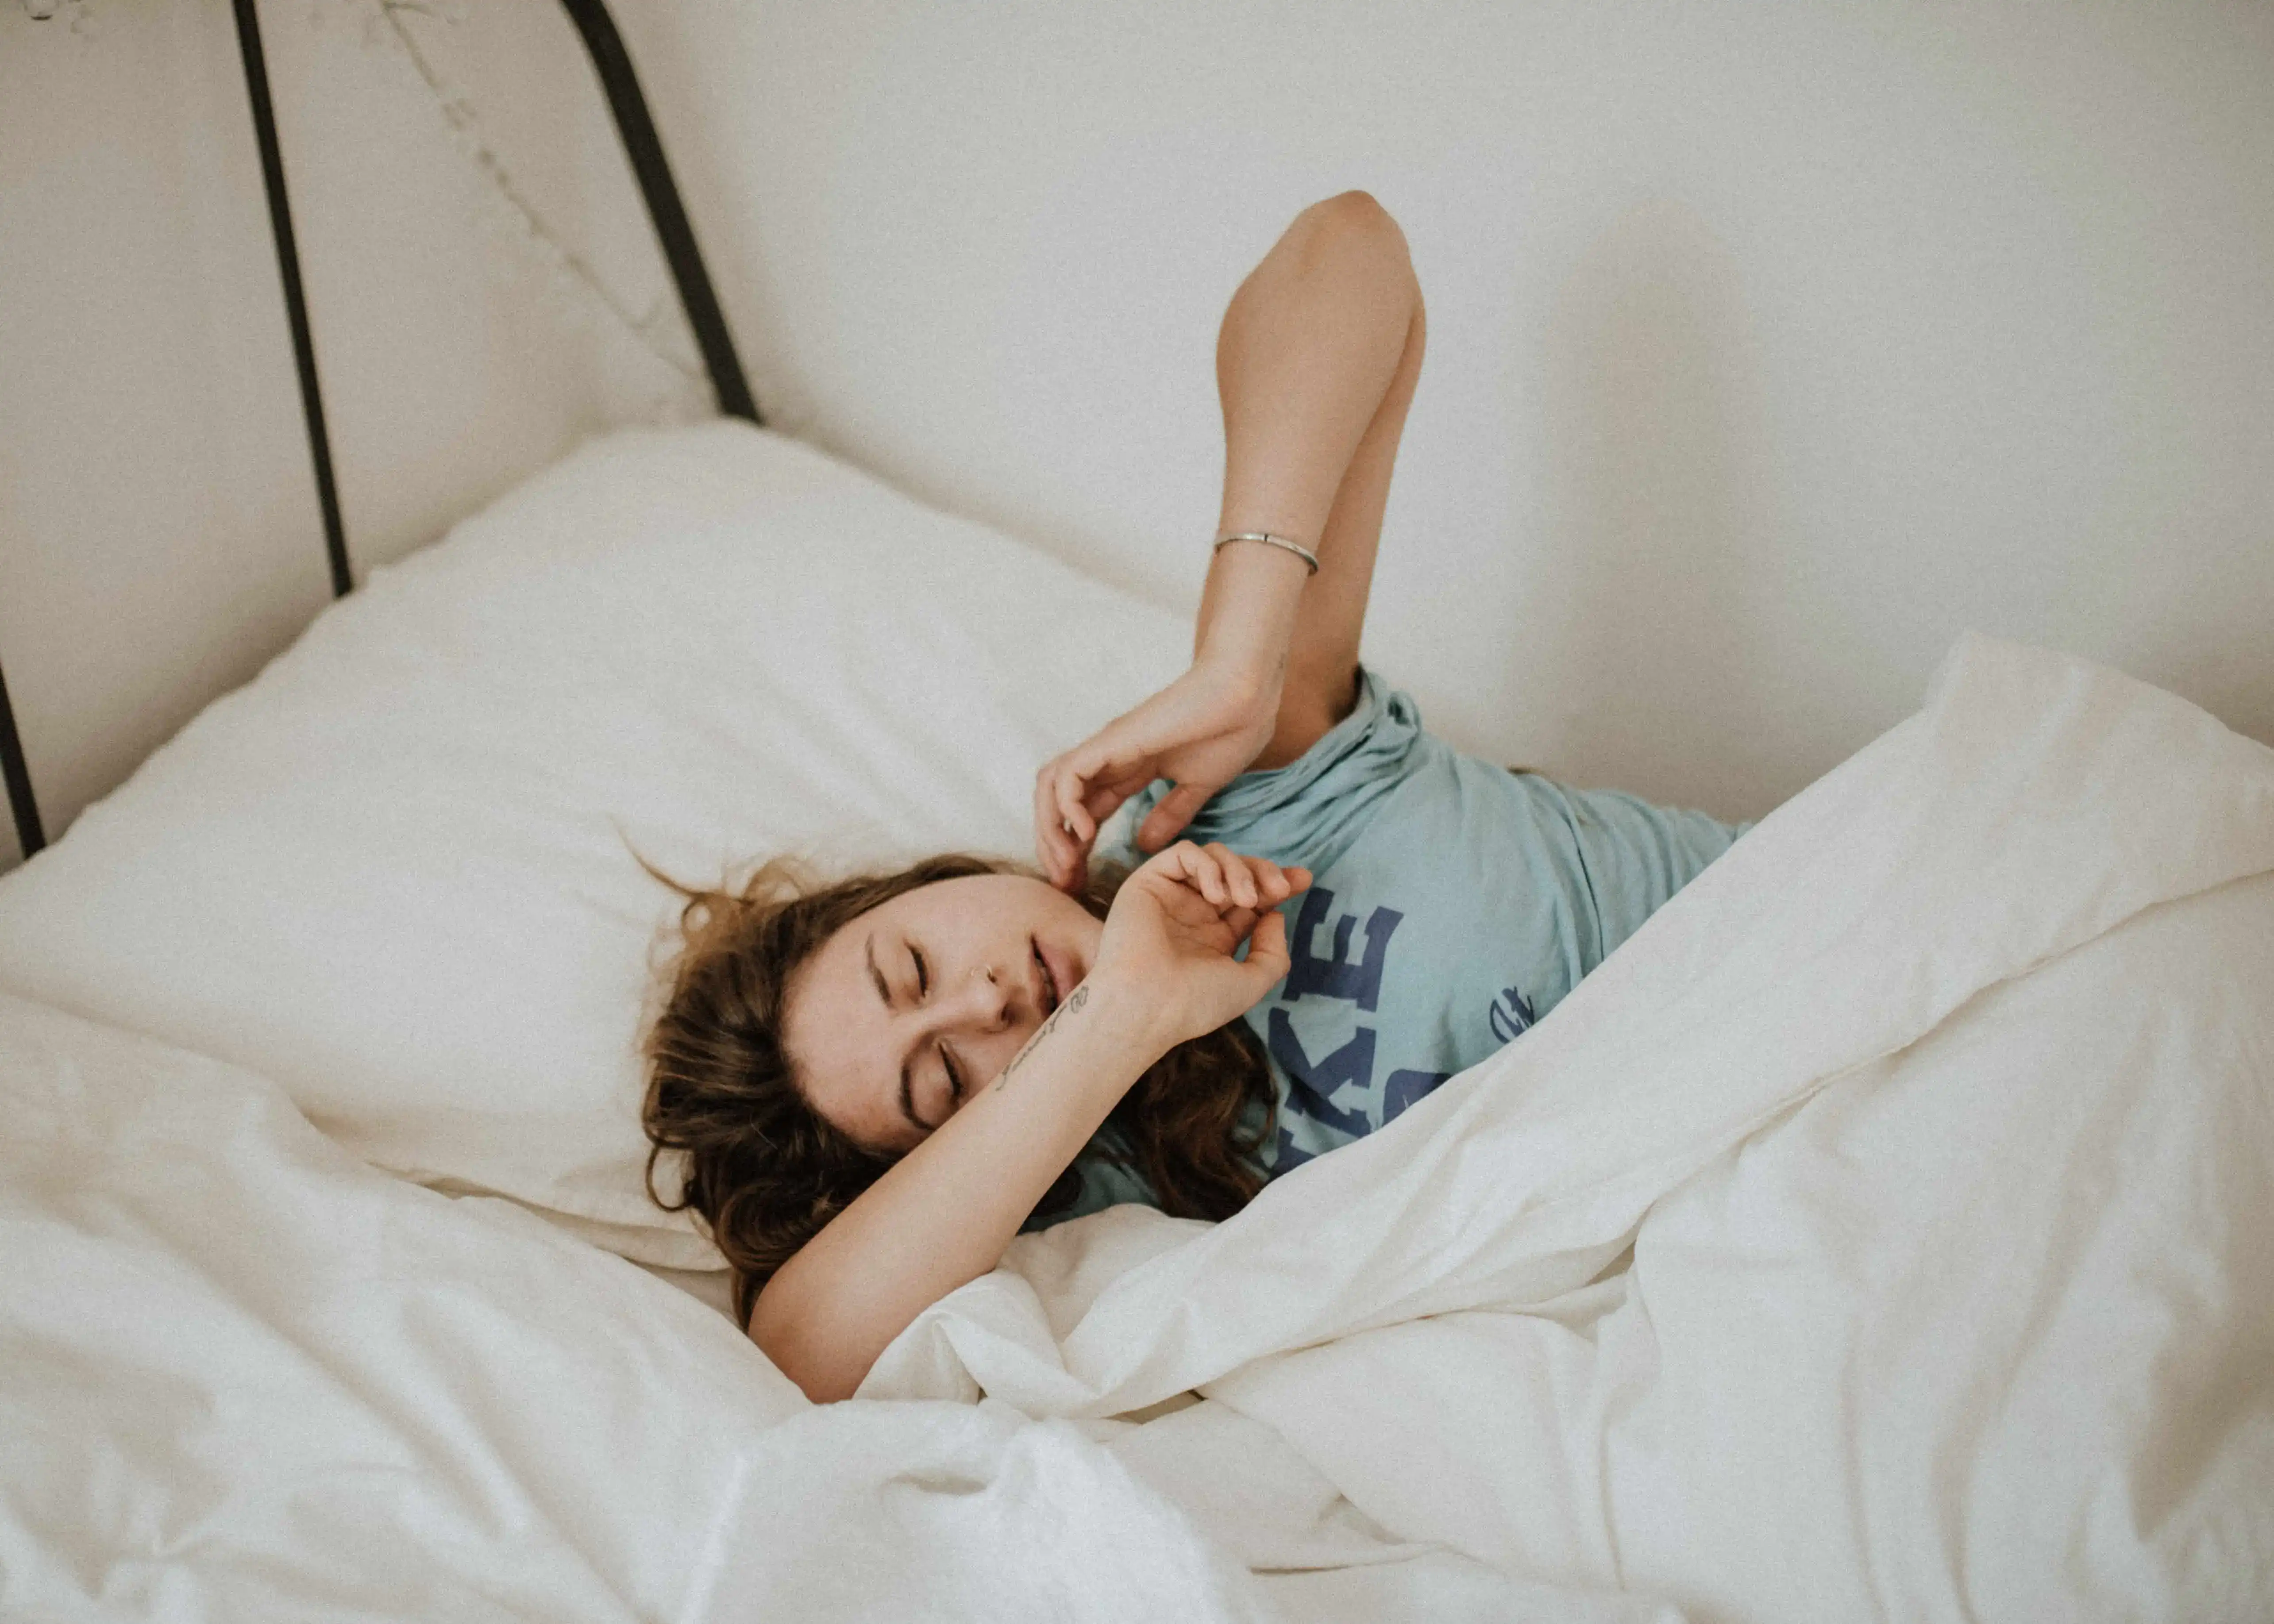 The Sweet Slumber Guide: Tips for Falling Asleep